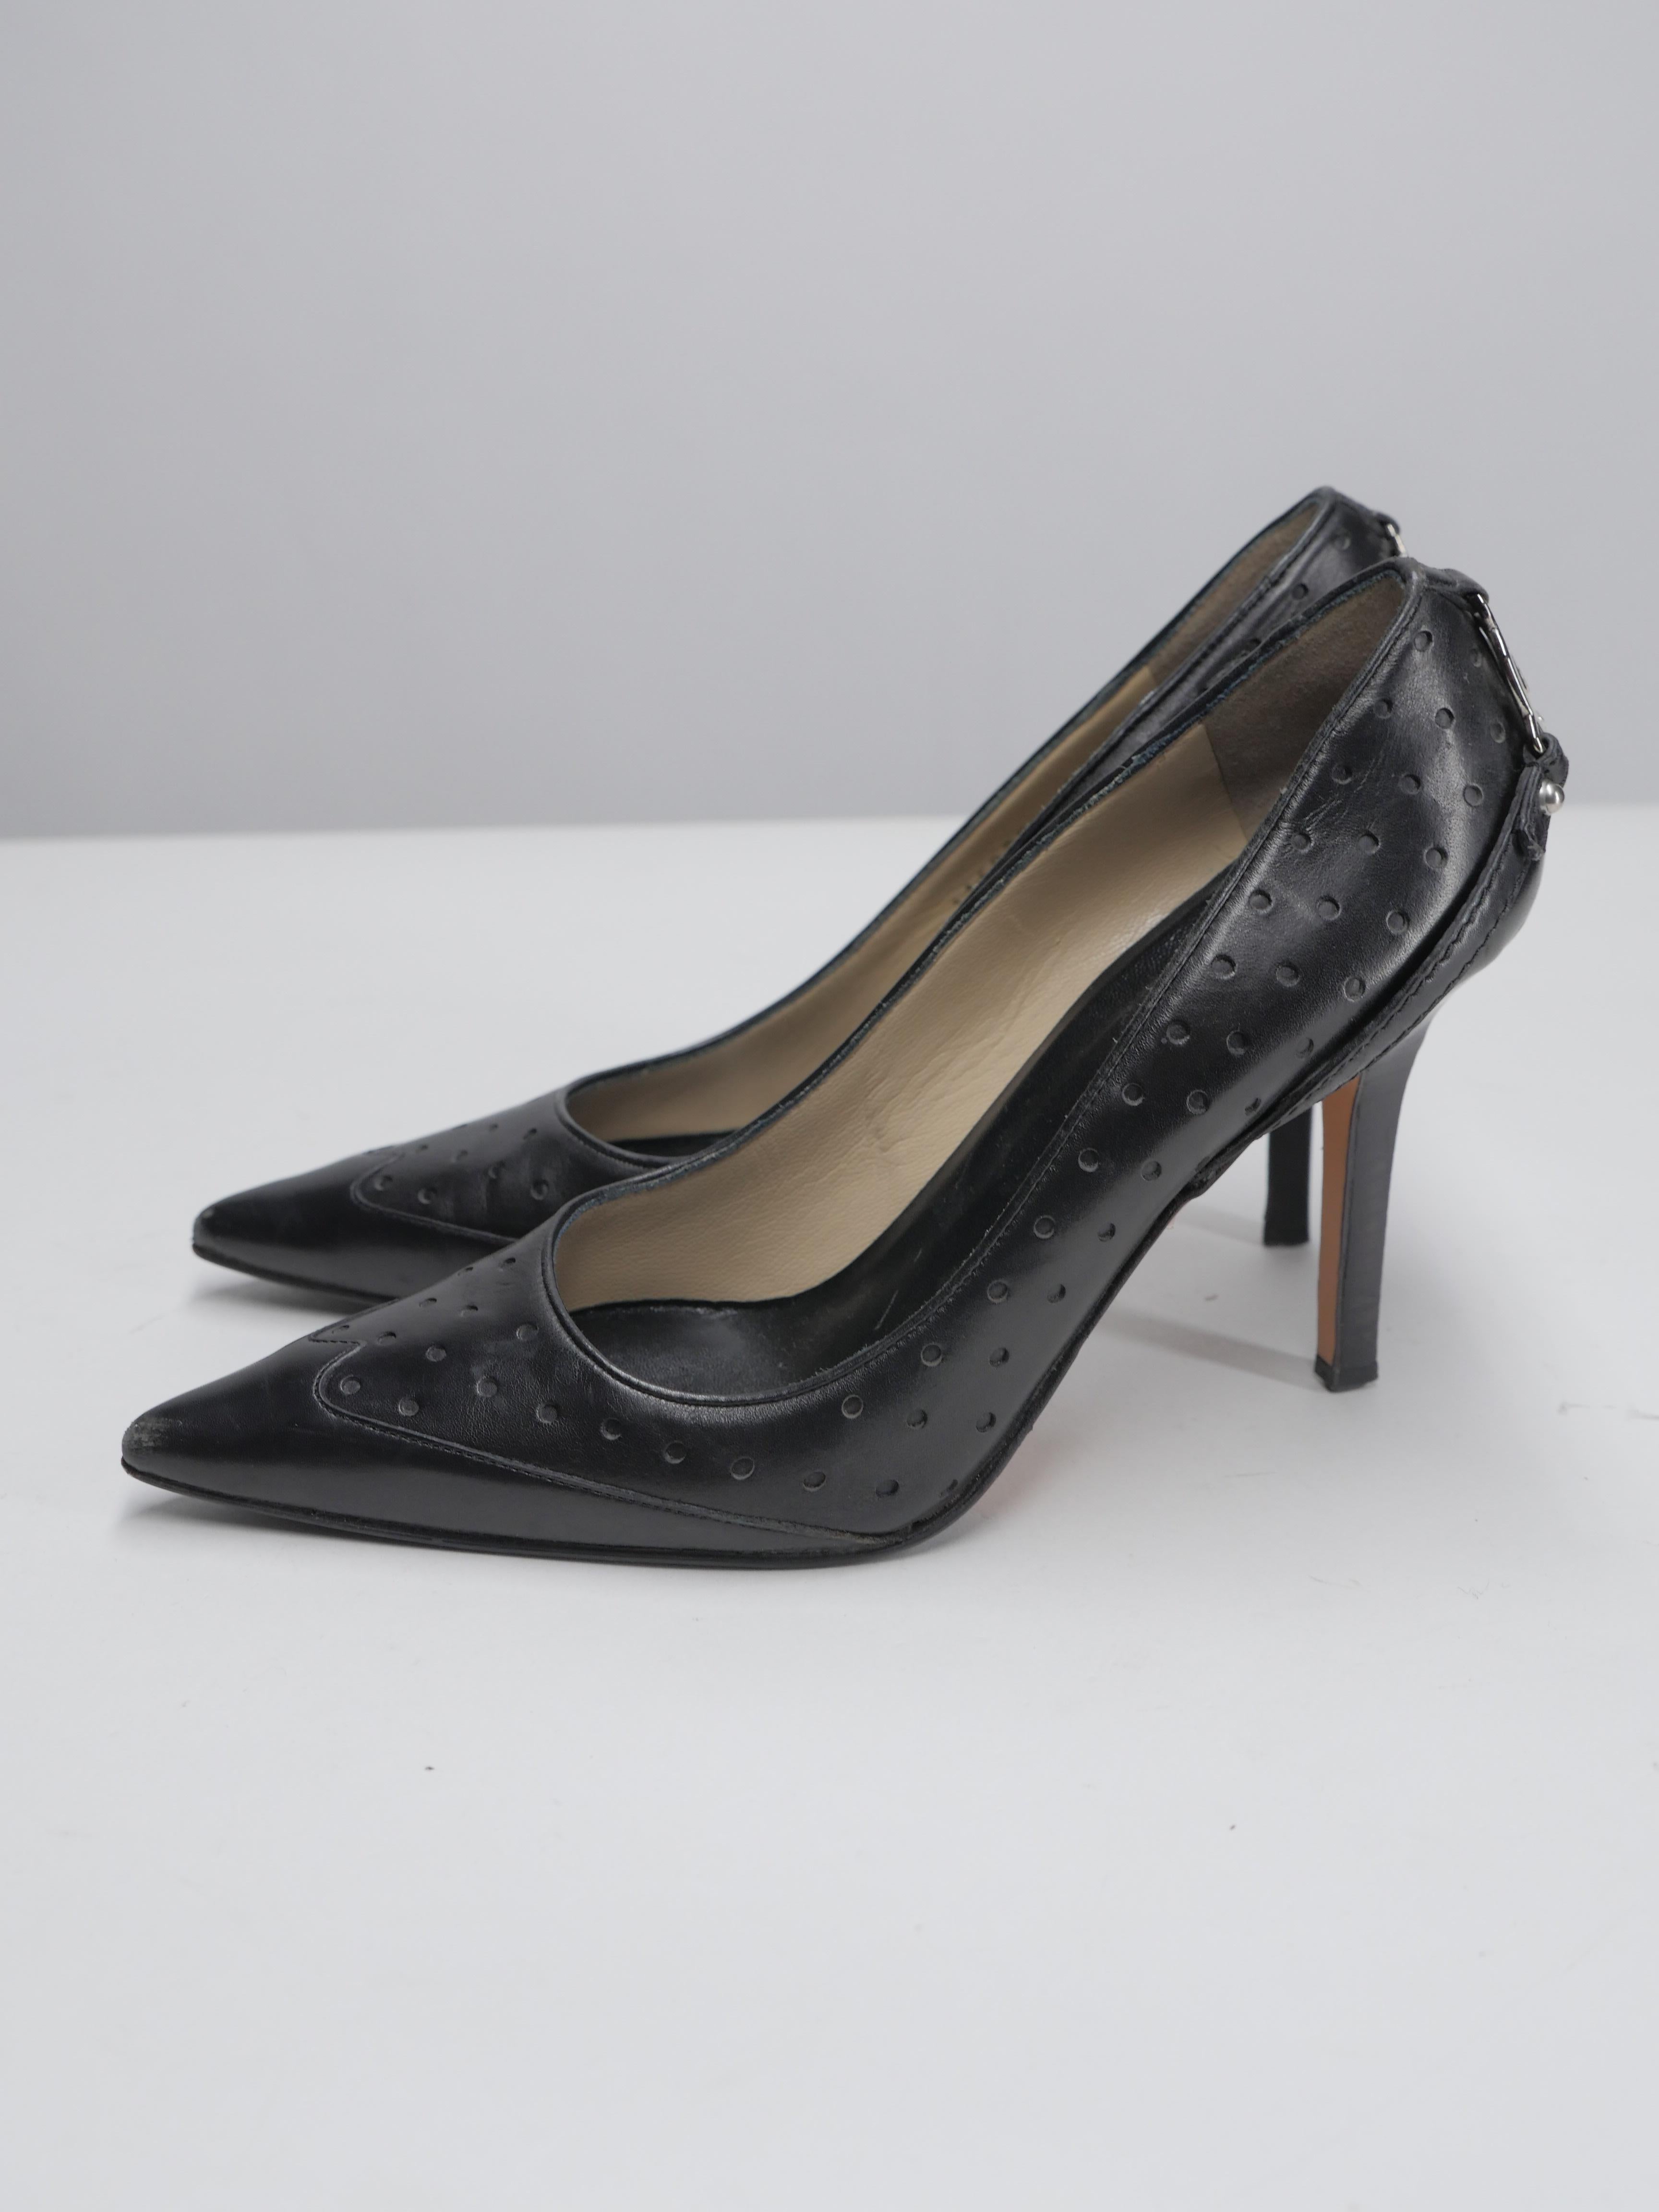 Gucci Size 6.5 Black Leather Perforated Pumps 9